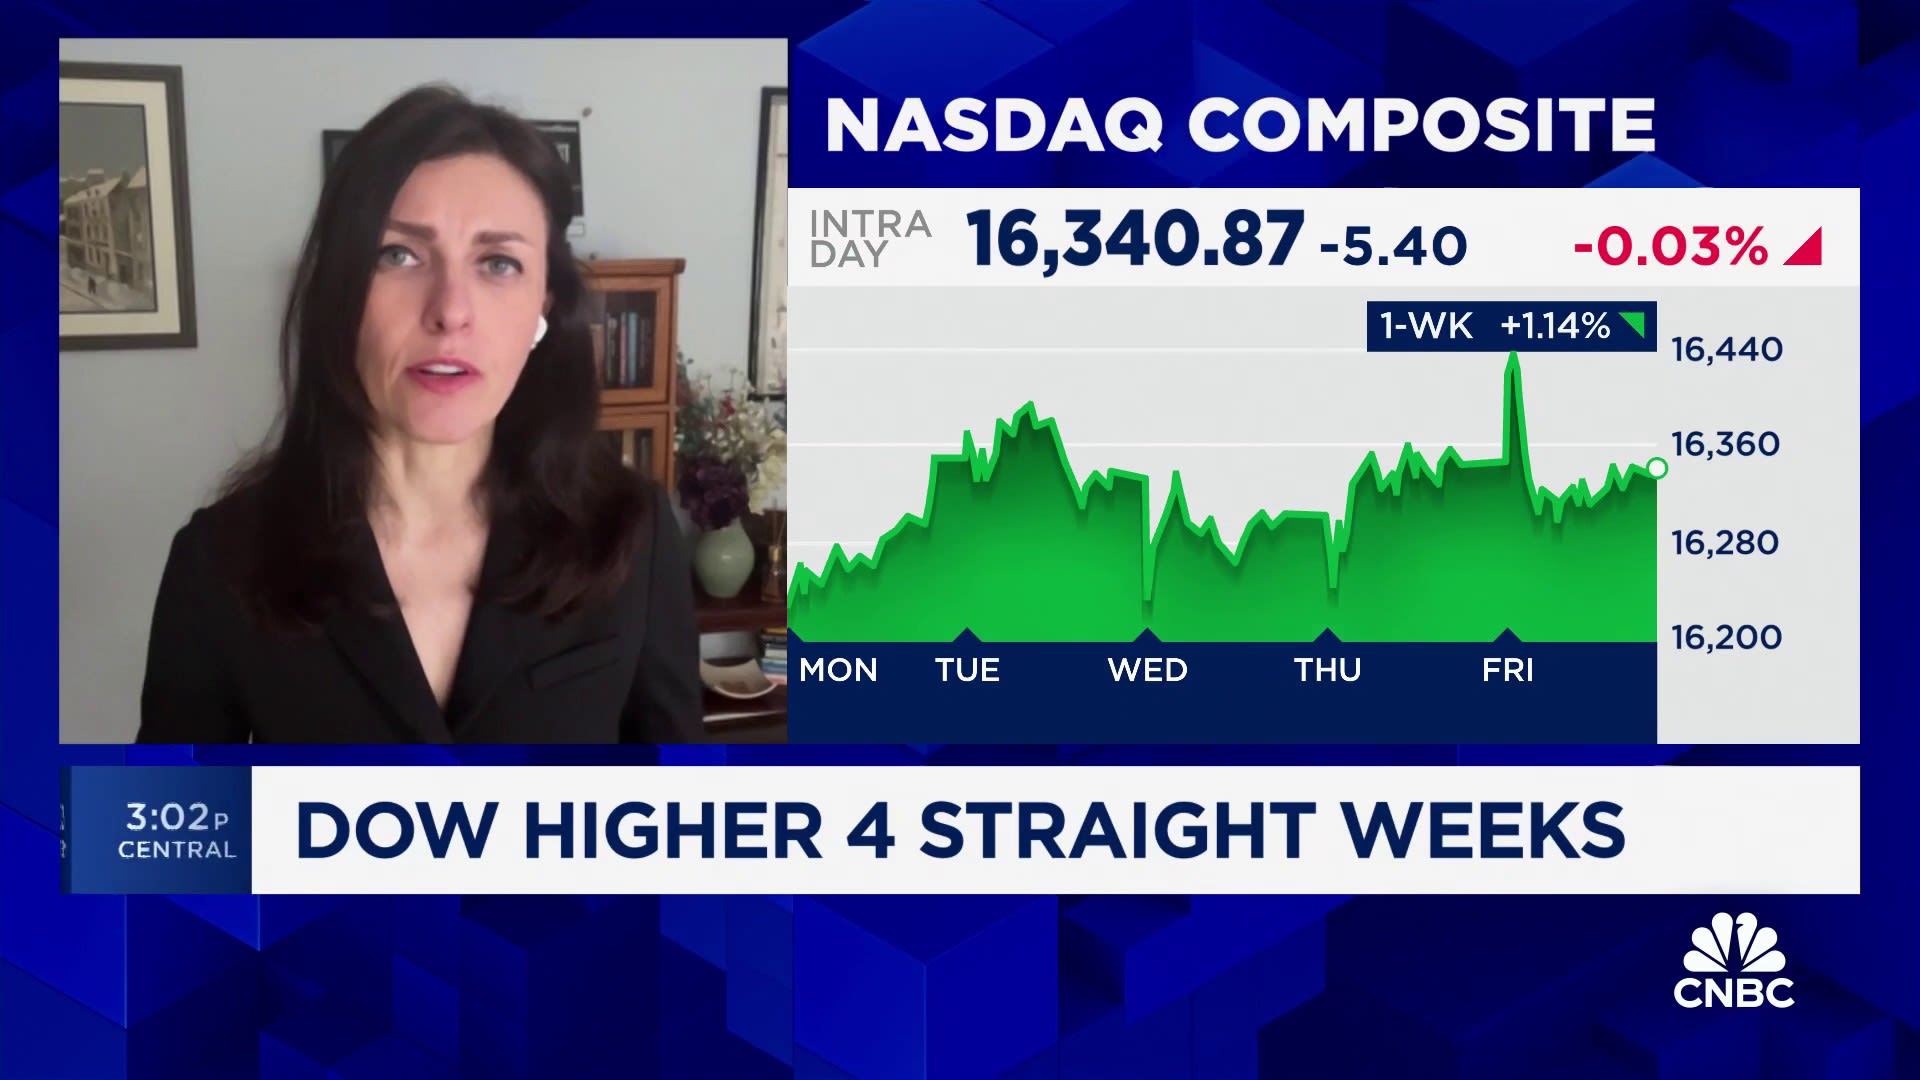 Earnings are holding the market up right now, says Envestnet’s Dana D’Auria [Video]